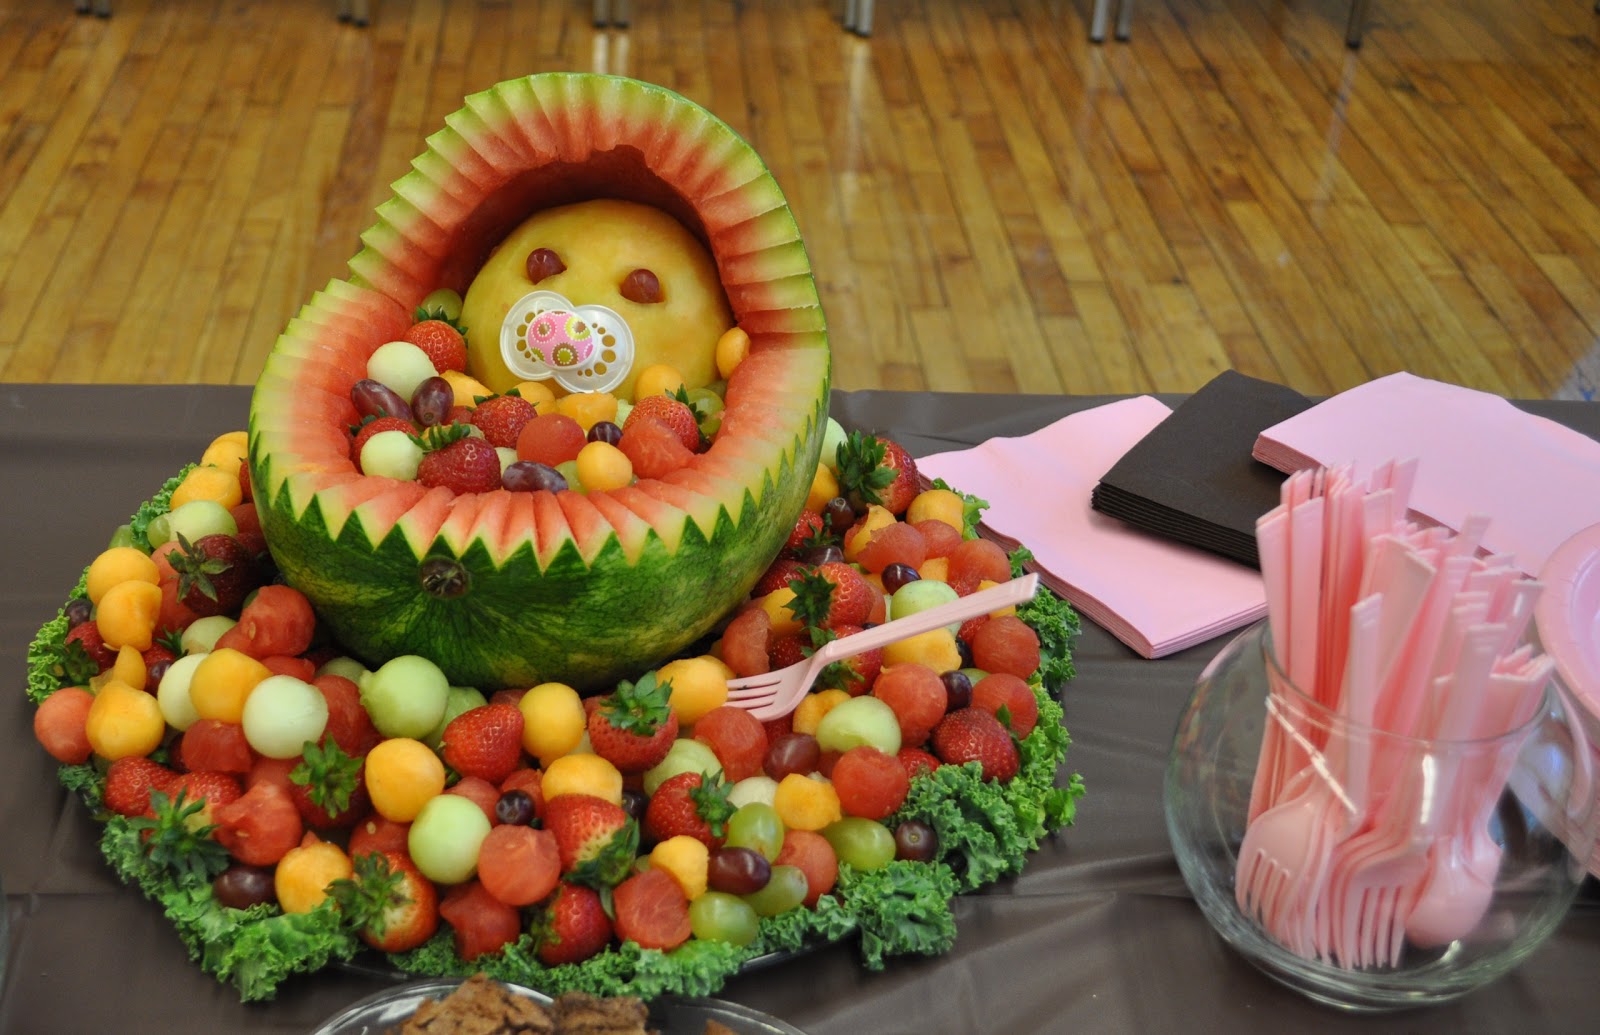 easy halloween cake designs Yep, there is a 'baby' in that watermelon!